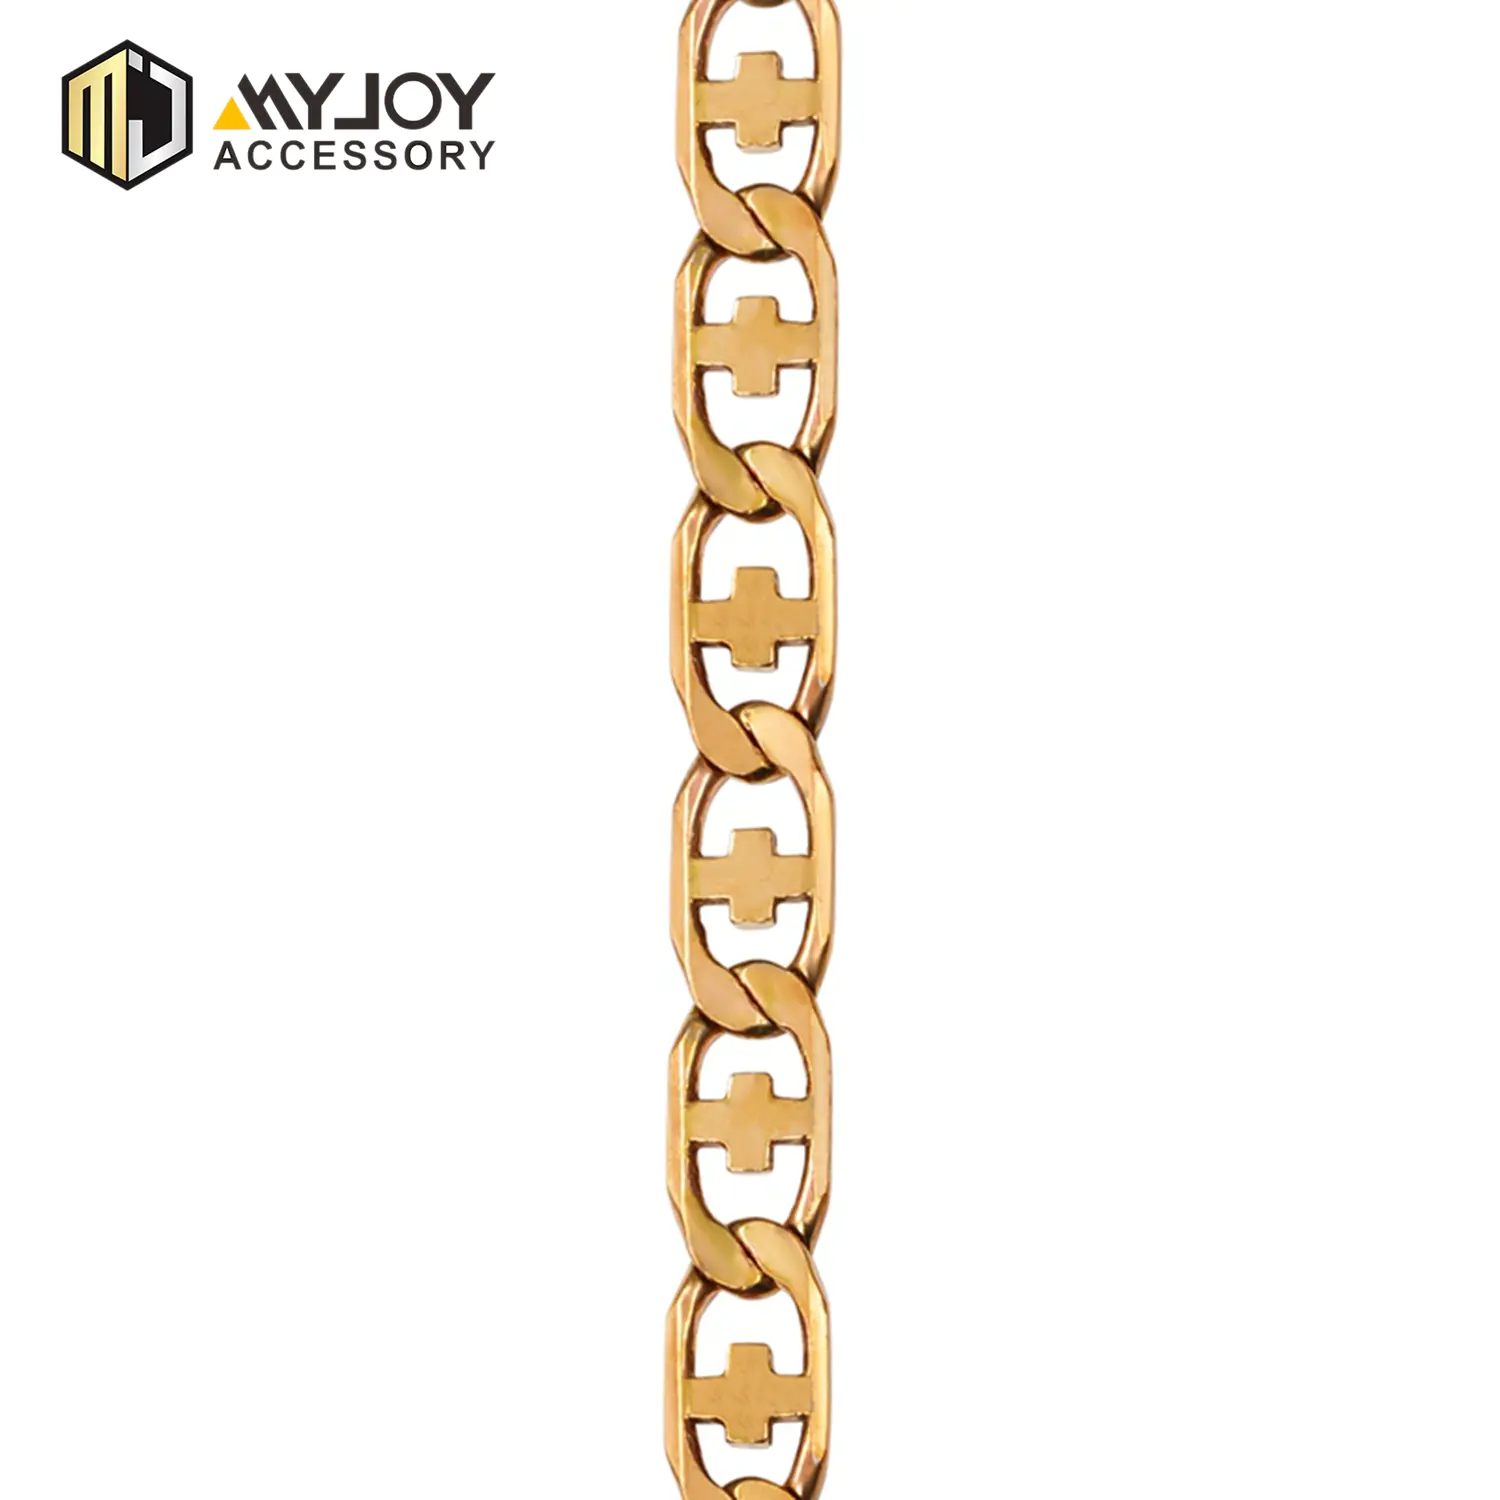 MYJOY New bag chain company for bags